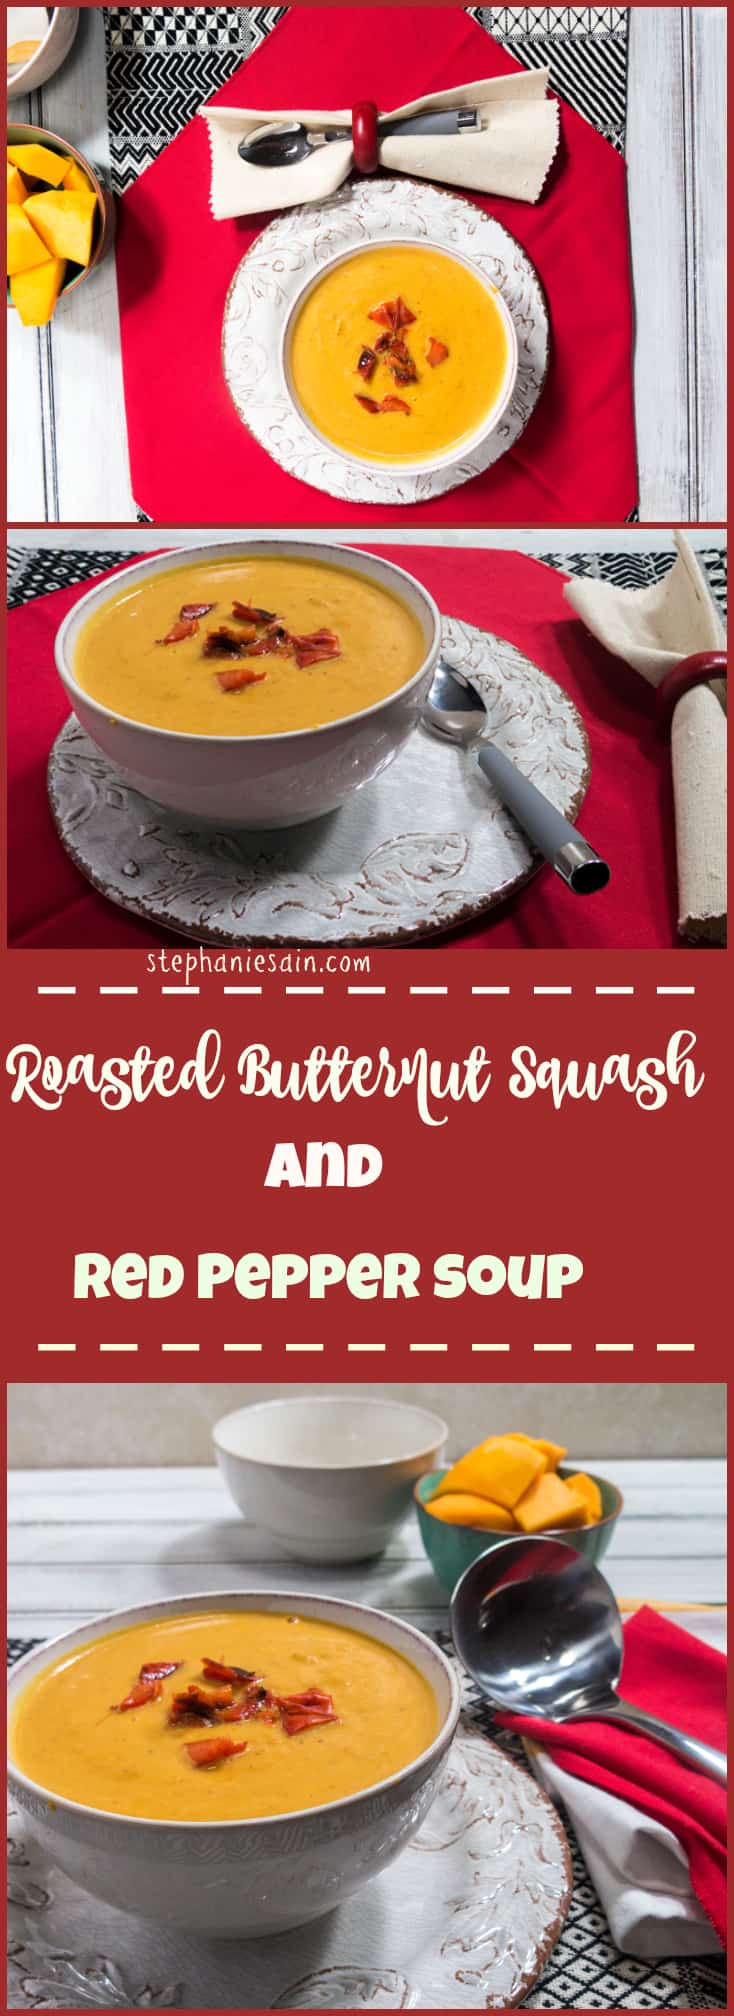 Roasted Butternut Squash & Red Pepper Soup is a creamy flavorful soup that is perfect for lunch or dinner anytime. Vegetarian and Gluten Free.